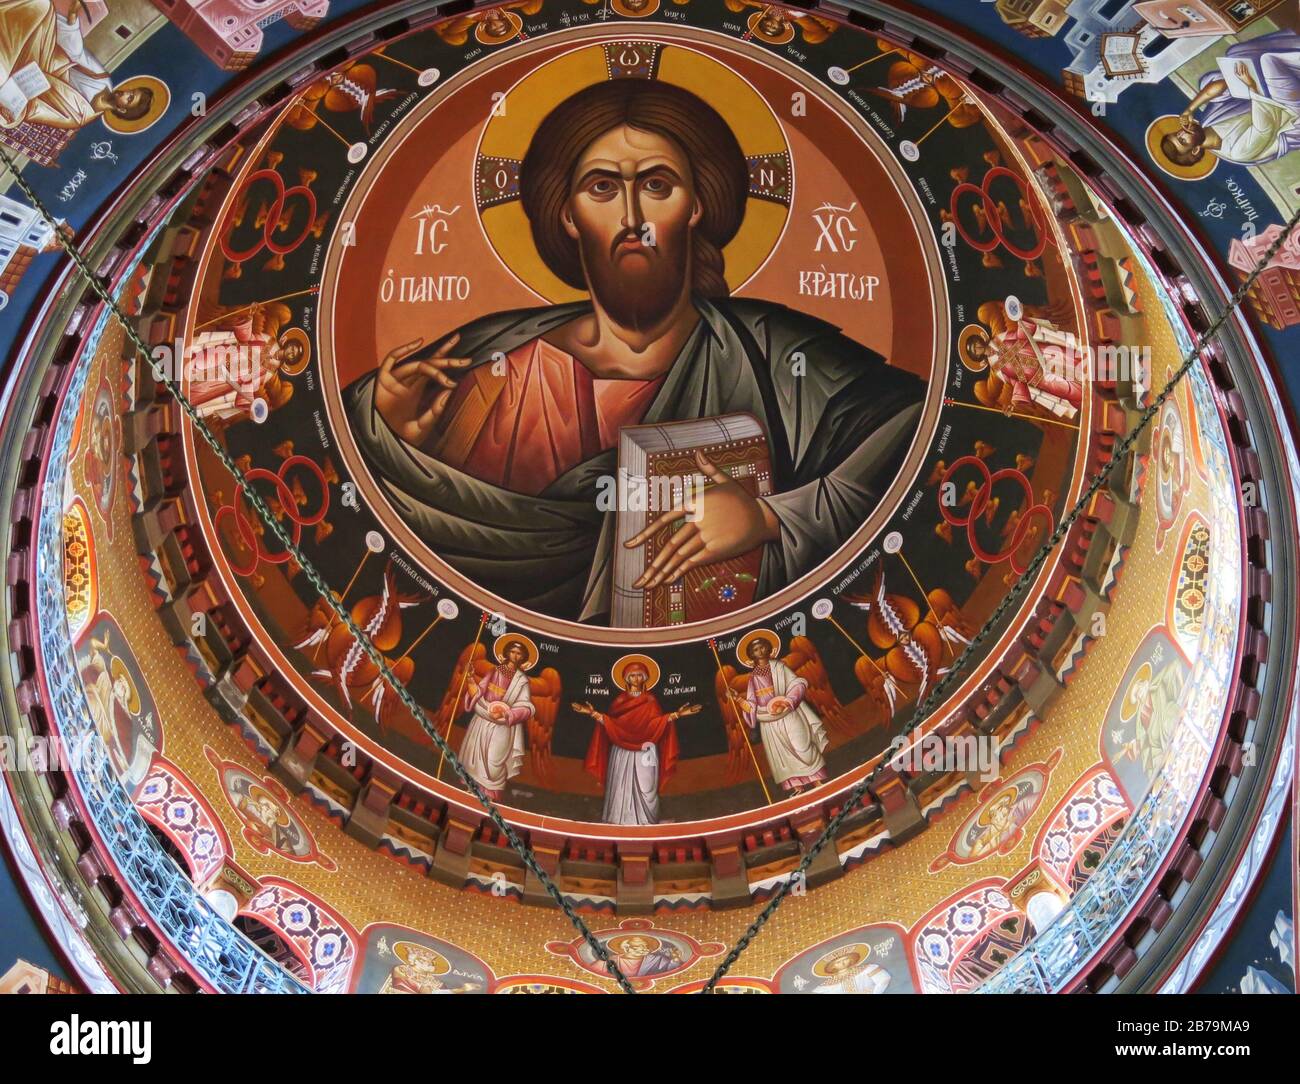 The mural of Jesus Christ  on the dome of Saint Mena's cathedral in Heraklion, Crete, Greece. Stock Photo